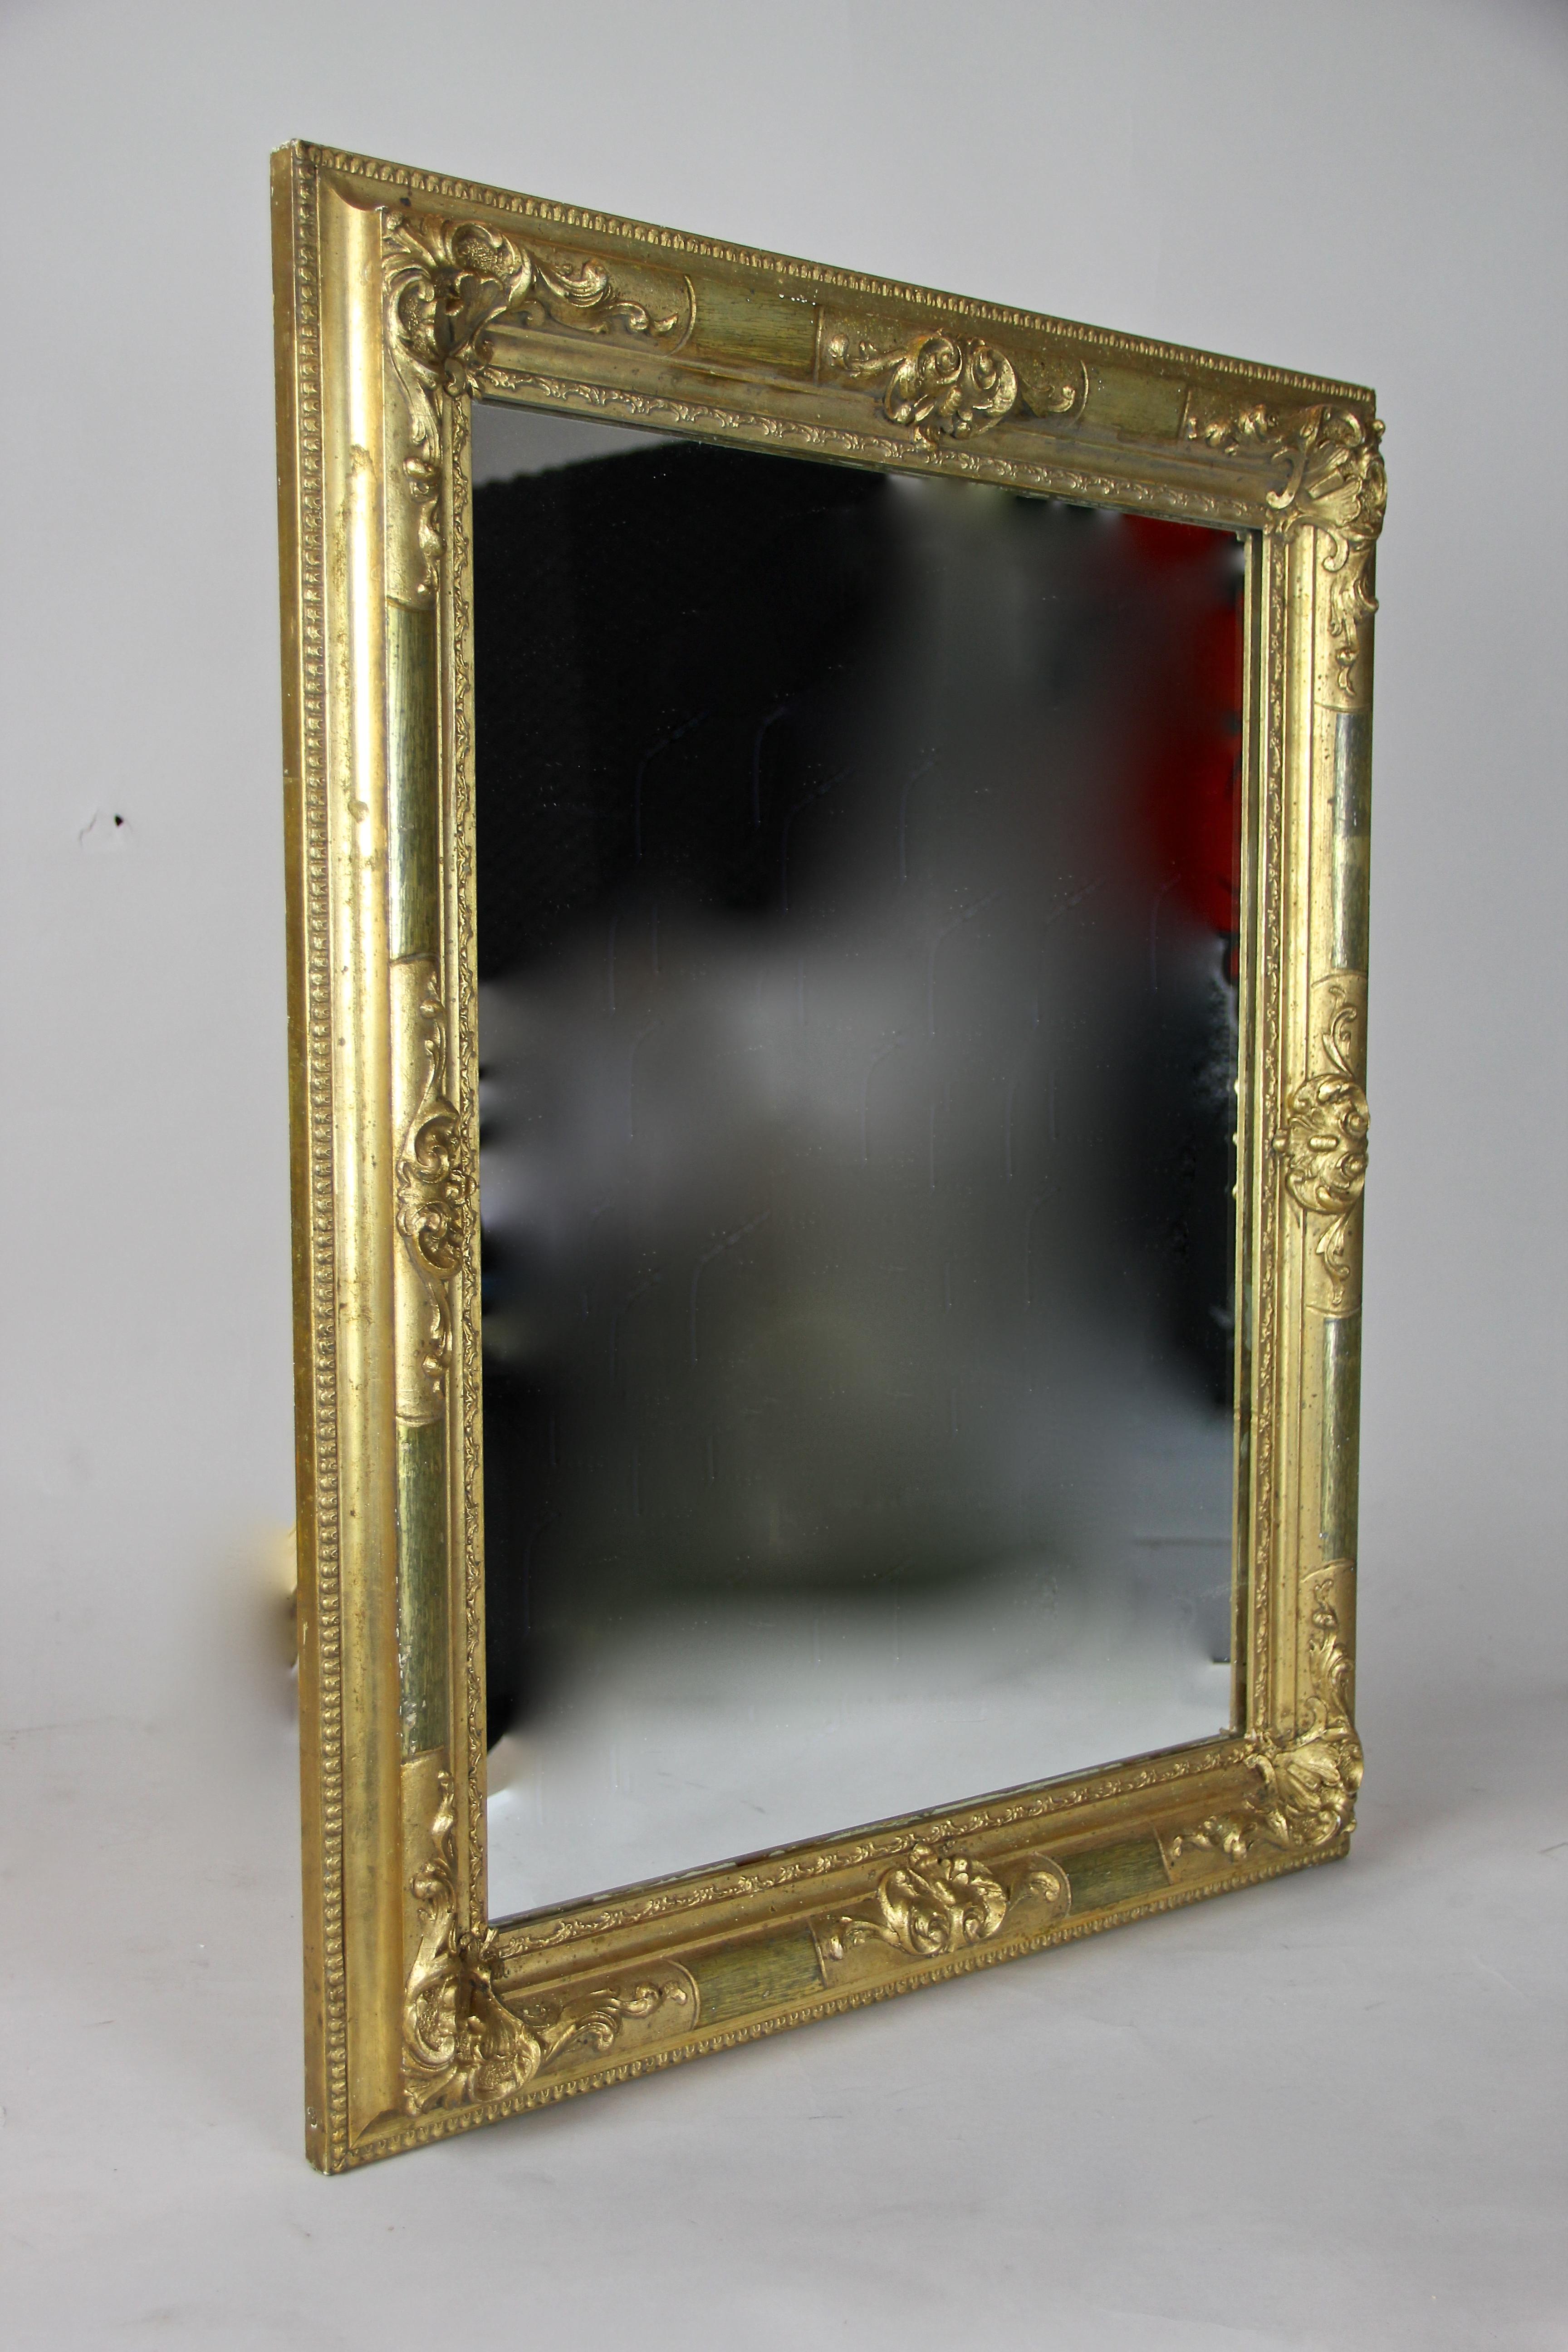 Remarkable gilt Biedermeier wall mirror from the later era circa 1850 in Austria. Nearly 170 year old, this great antique mirror was minimal restored by taking greatest care to keep its unique character. Only the mirror glass had to be renewed. The